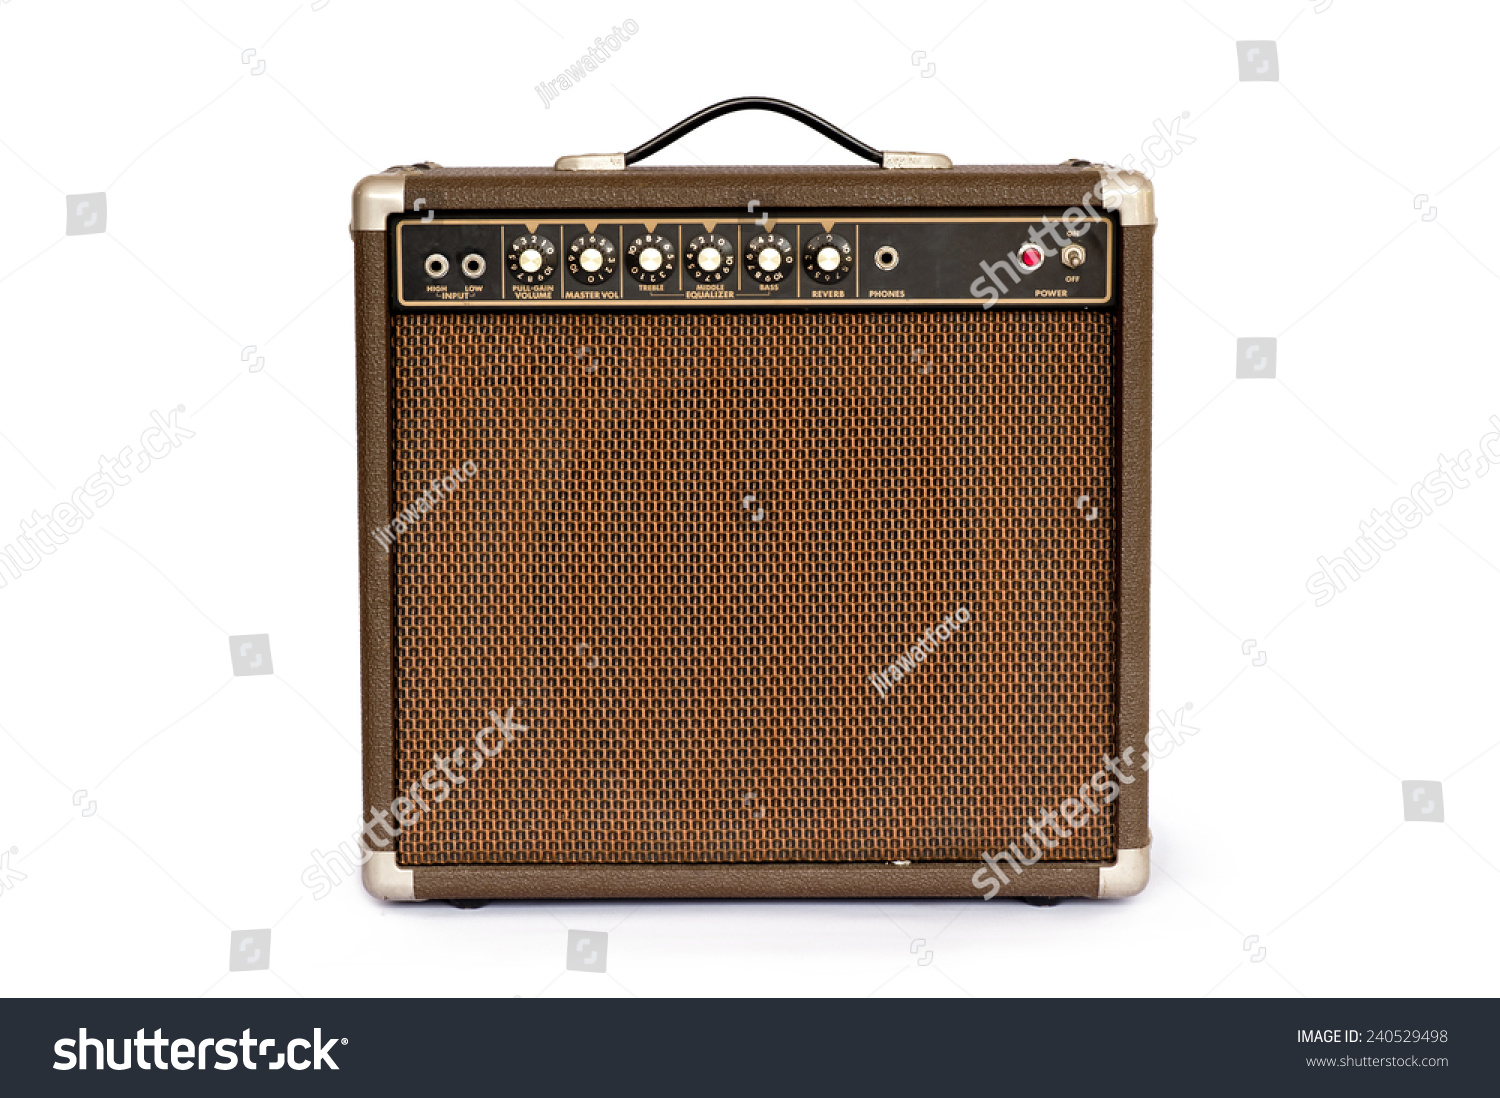 Brown electric guitar amplifier isolated on white background #240529498